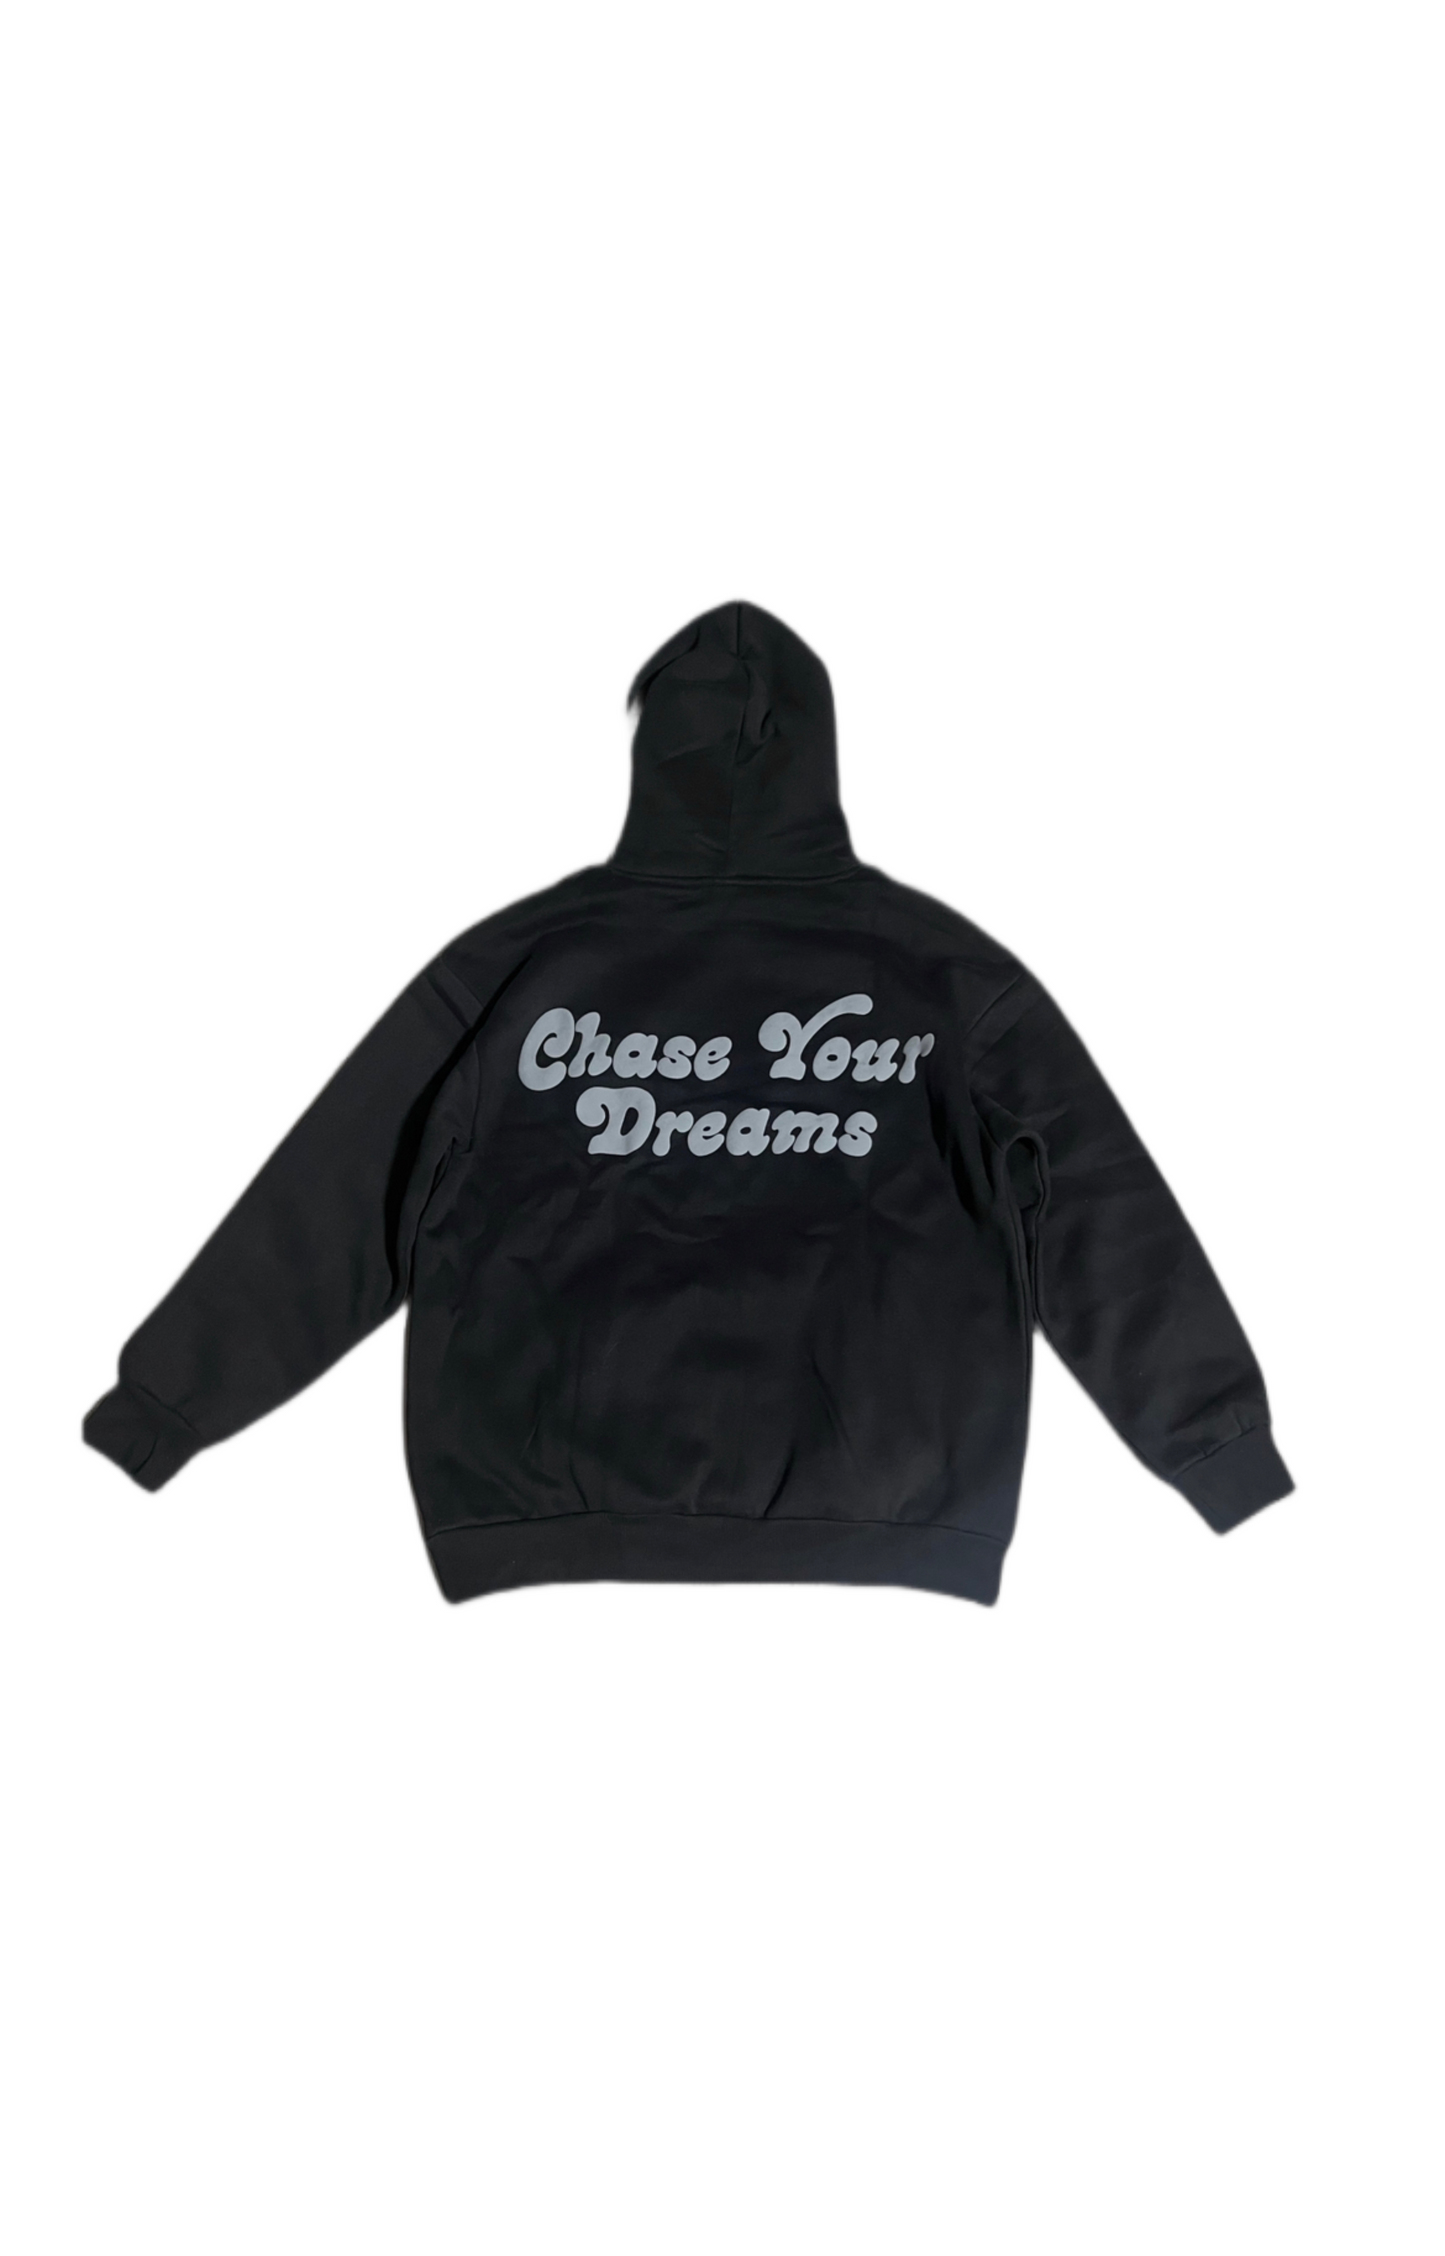 DREAMERS EDITION HOODIE “MIDNIGHT”